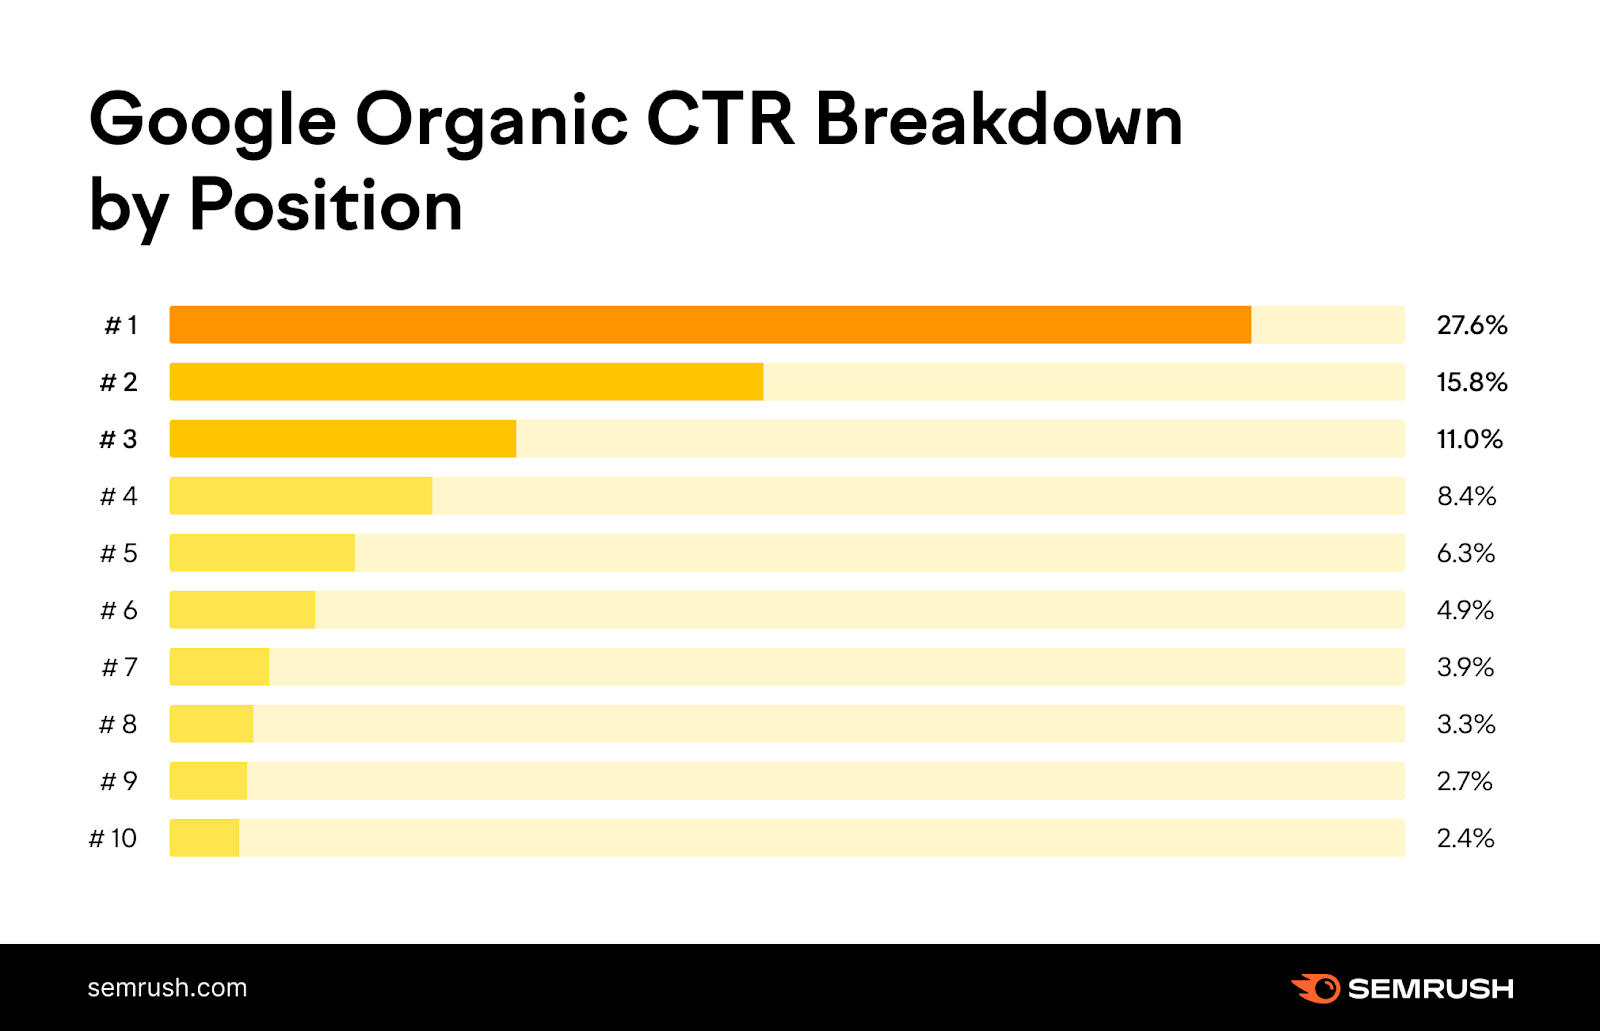 a graph generated by Semrush research showing Google organic CTR breakdown by position